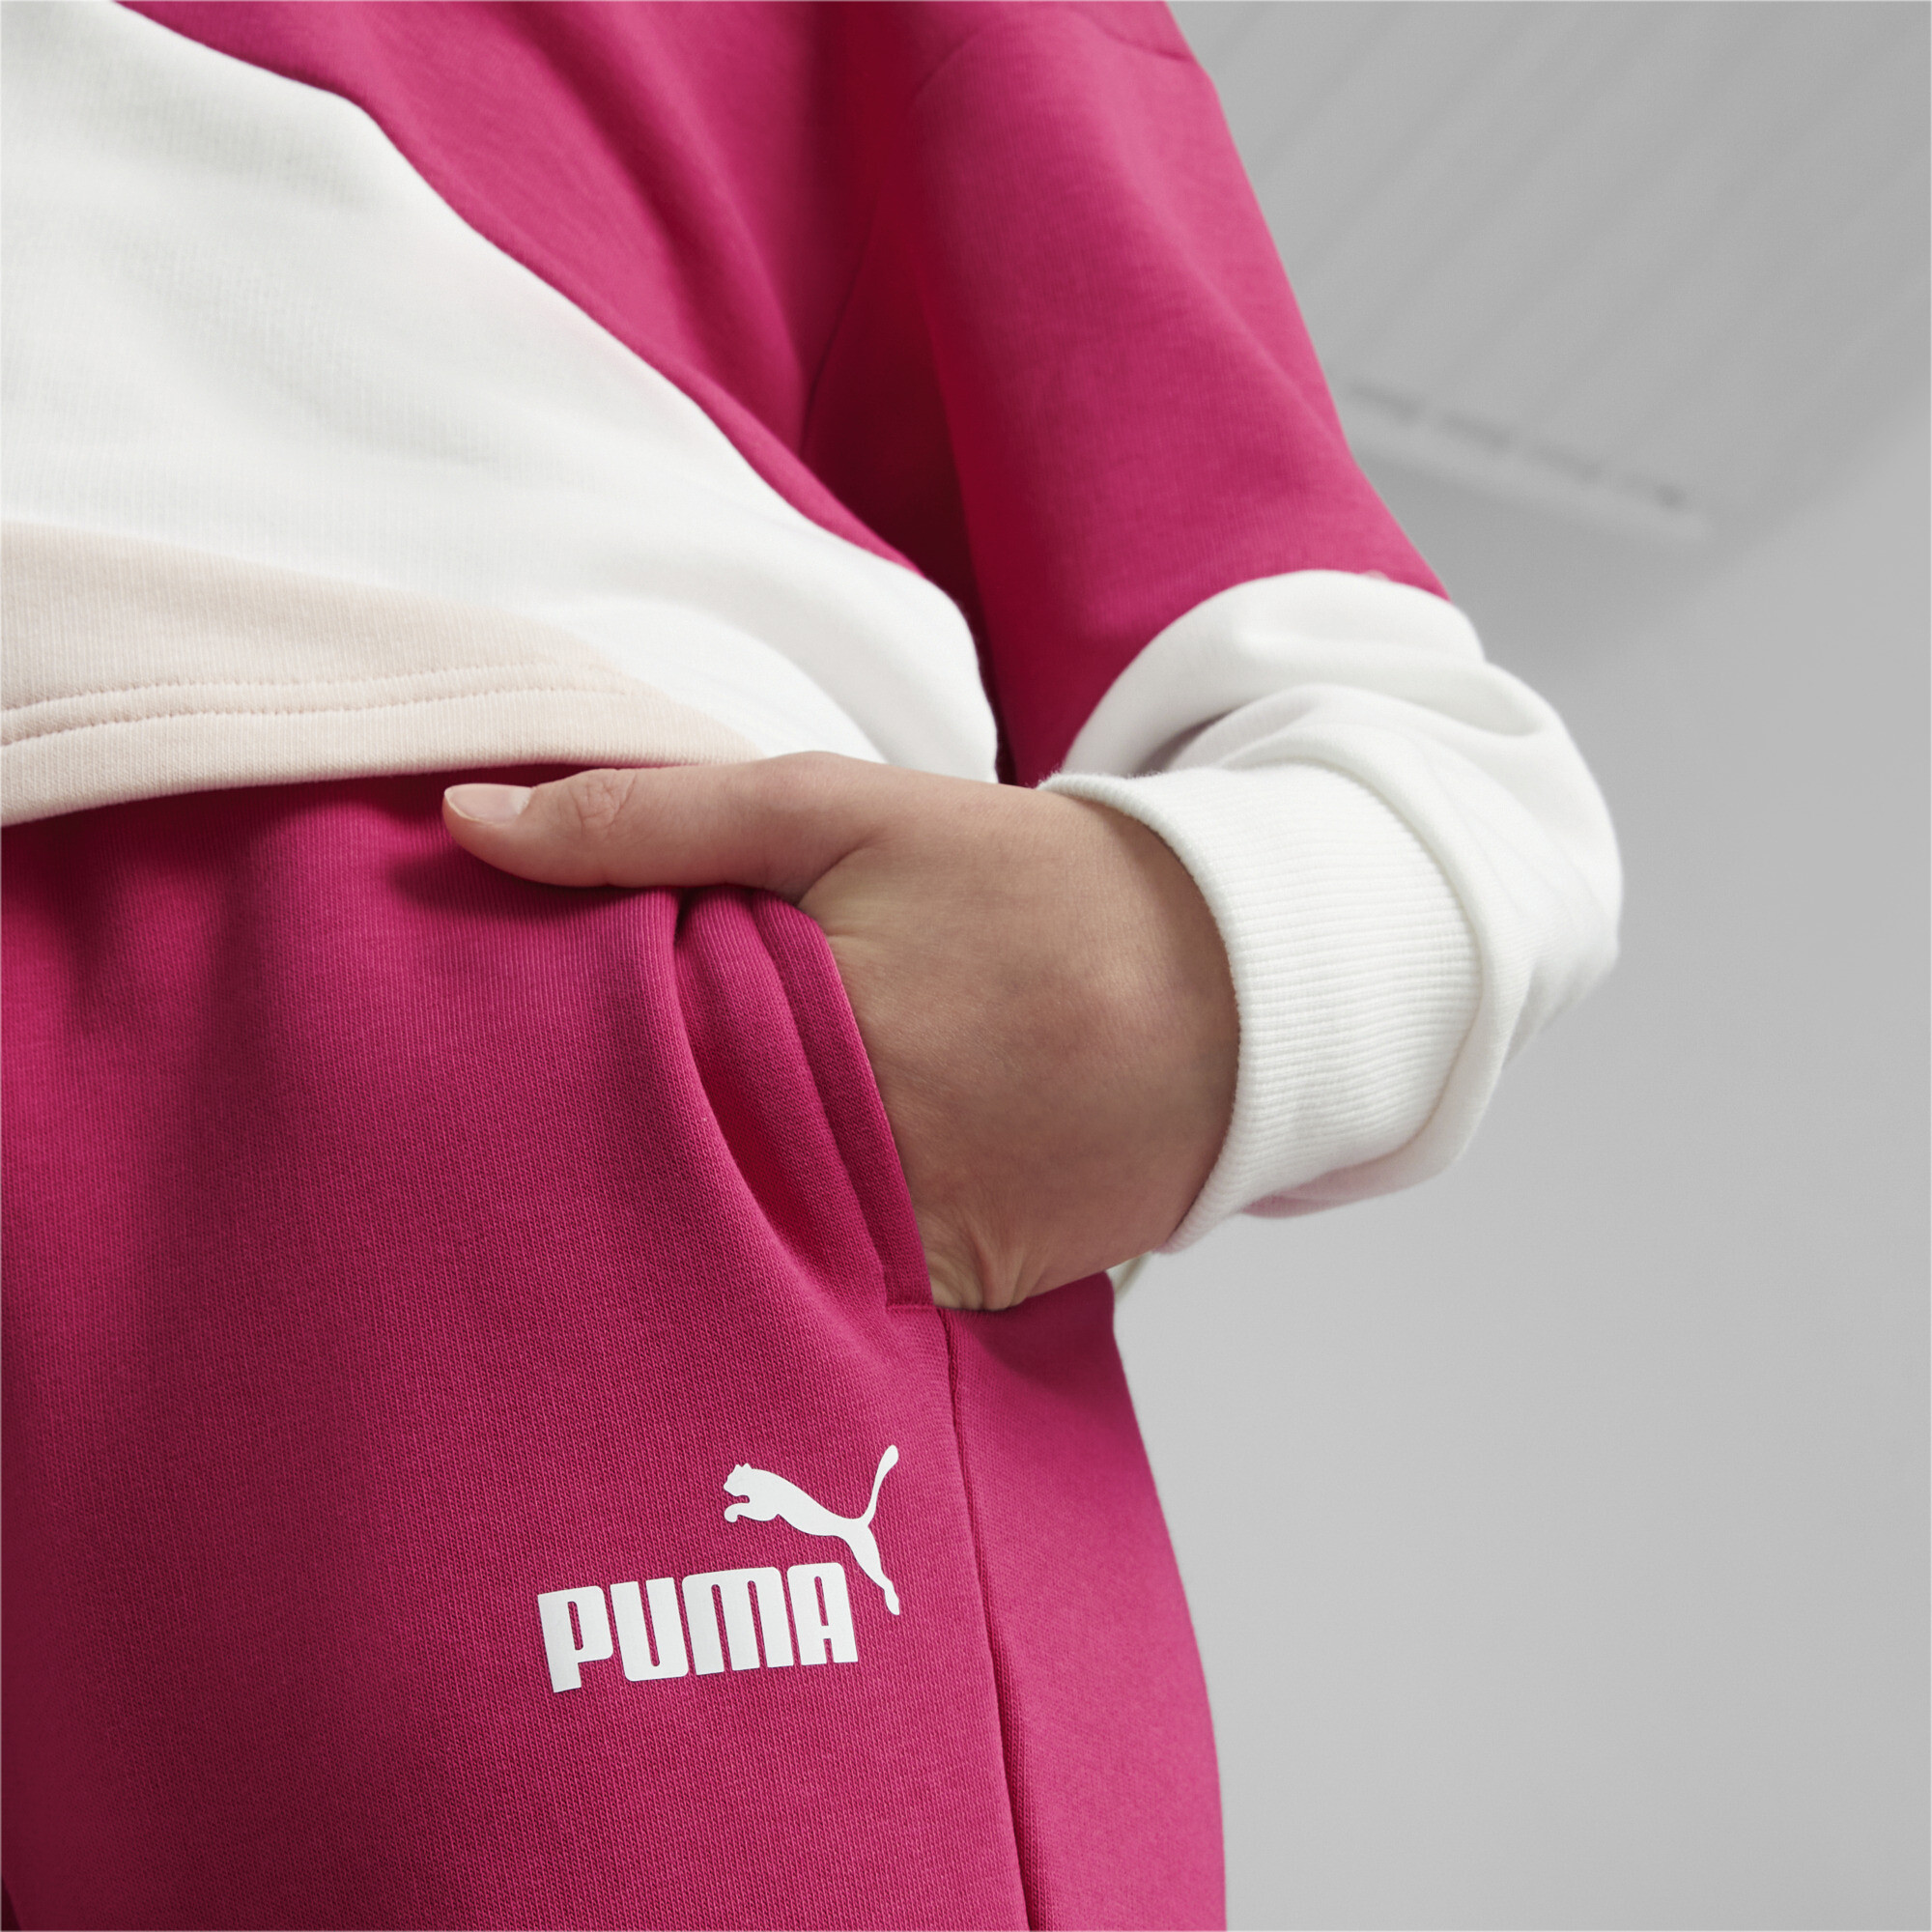 PUMA POWER Cat Pants In Pink, Size 7-8 Youth